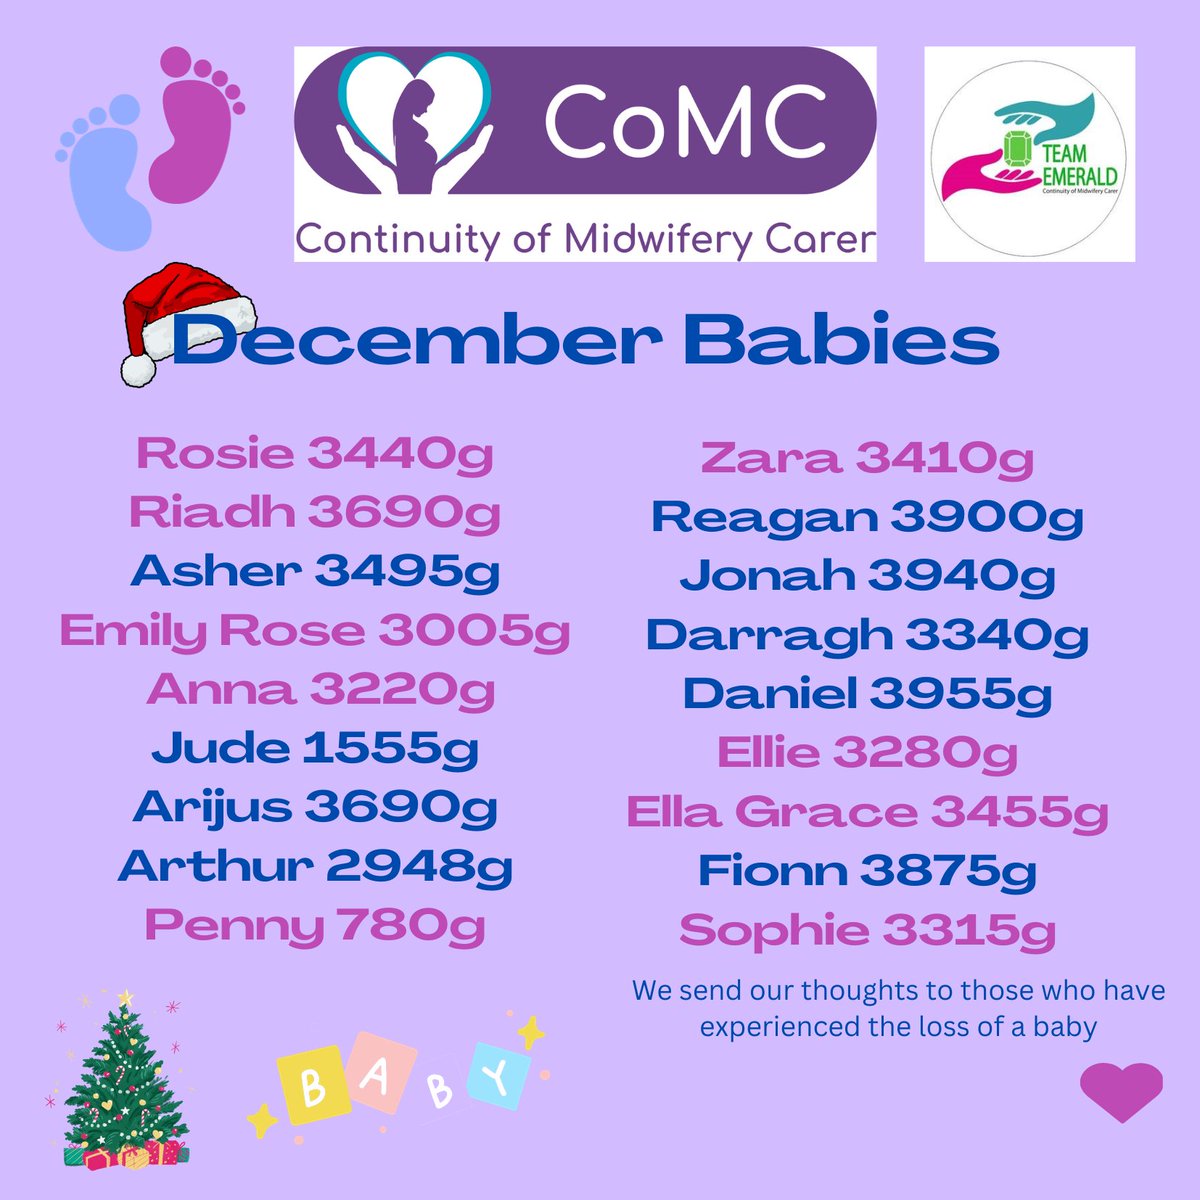 Some beautiful names for our December babies, born through our Continuity of Midwifery Carer (CoMC) model. 💙💜 #TeamSHSCT